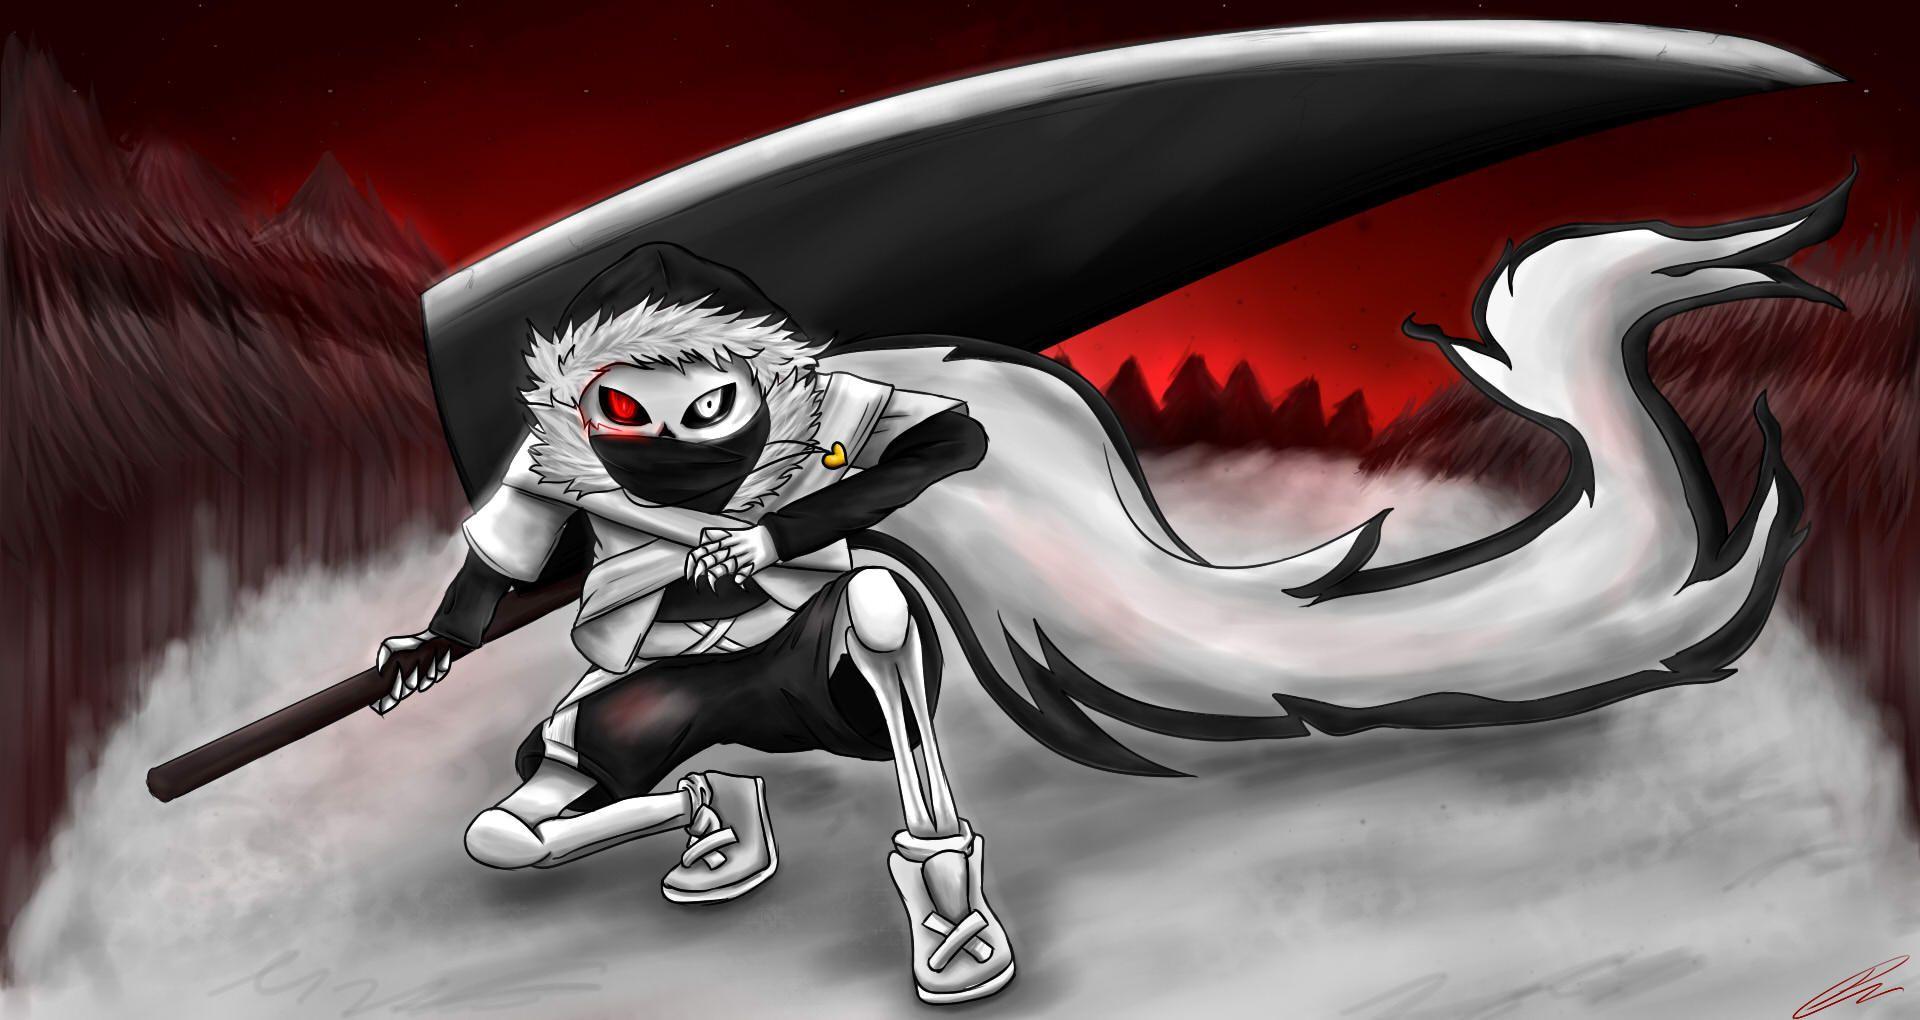 Underfell Wallpapers - Wallpaper Cave